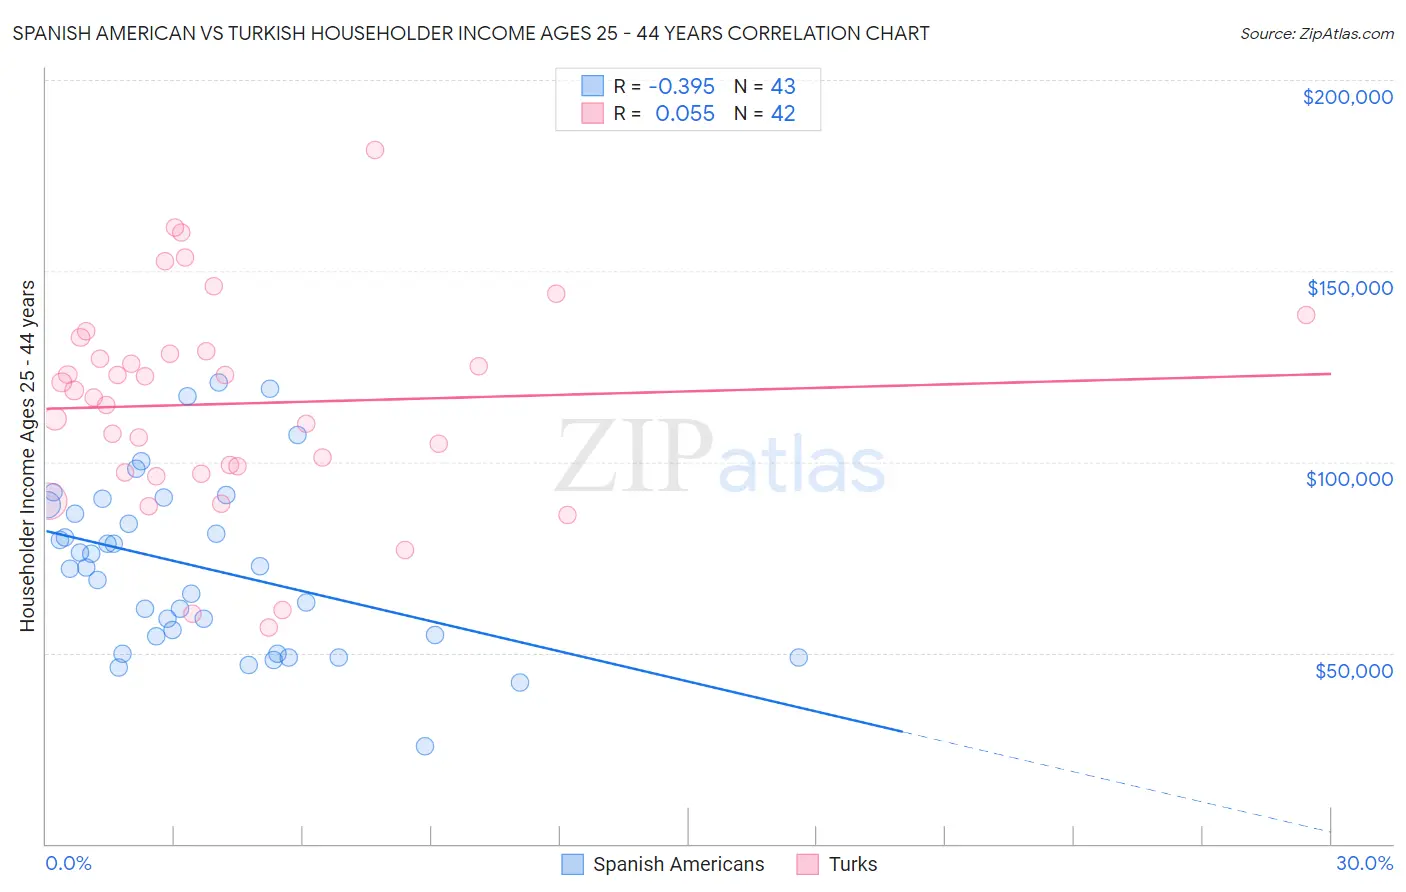 Spanish American vs Turkish Householder Income Ages 25 - 44 years